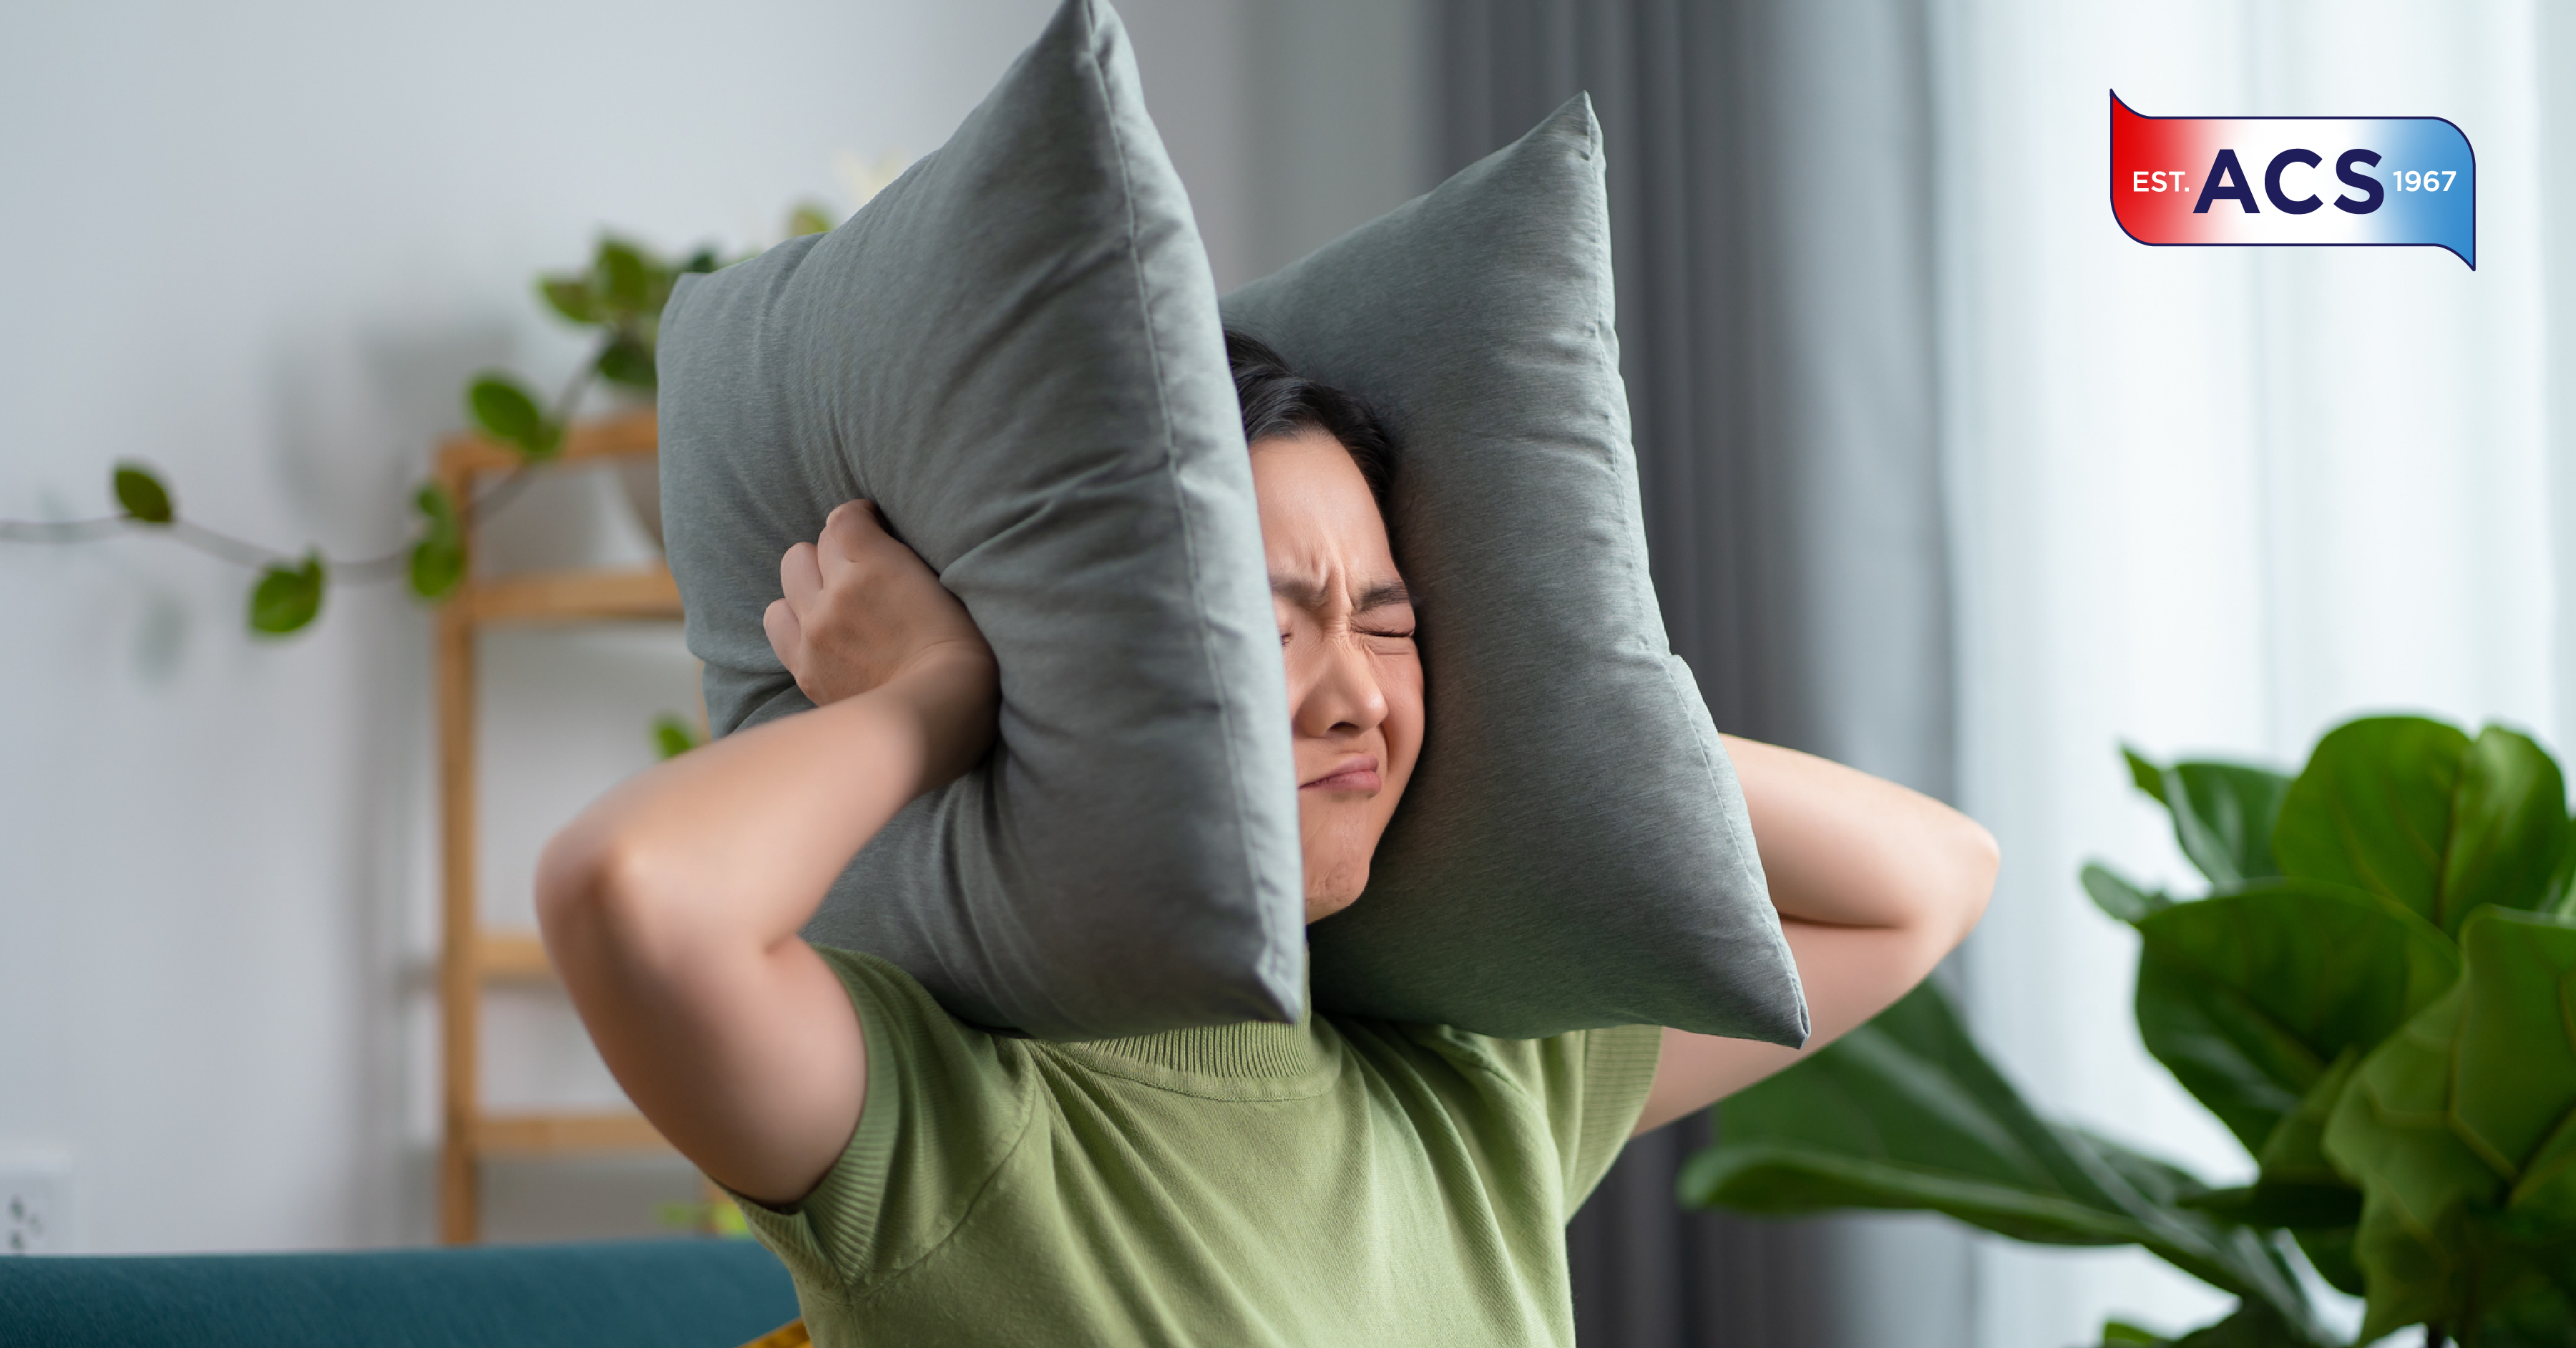 Woman holding pillows to her head to stop hearing annoying HVAC unit noise